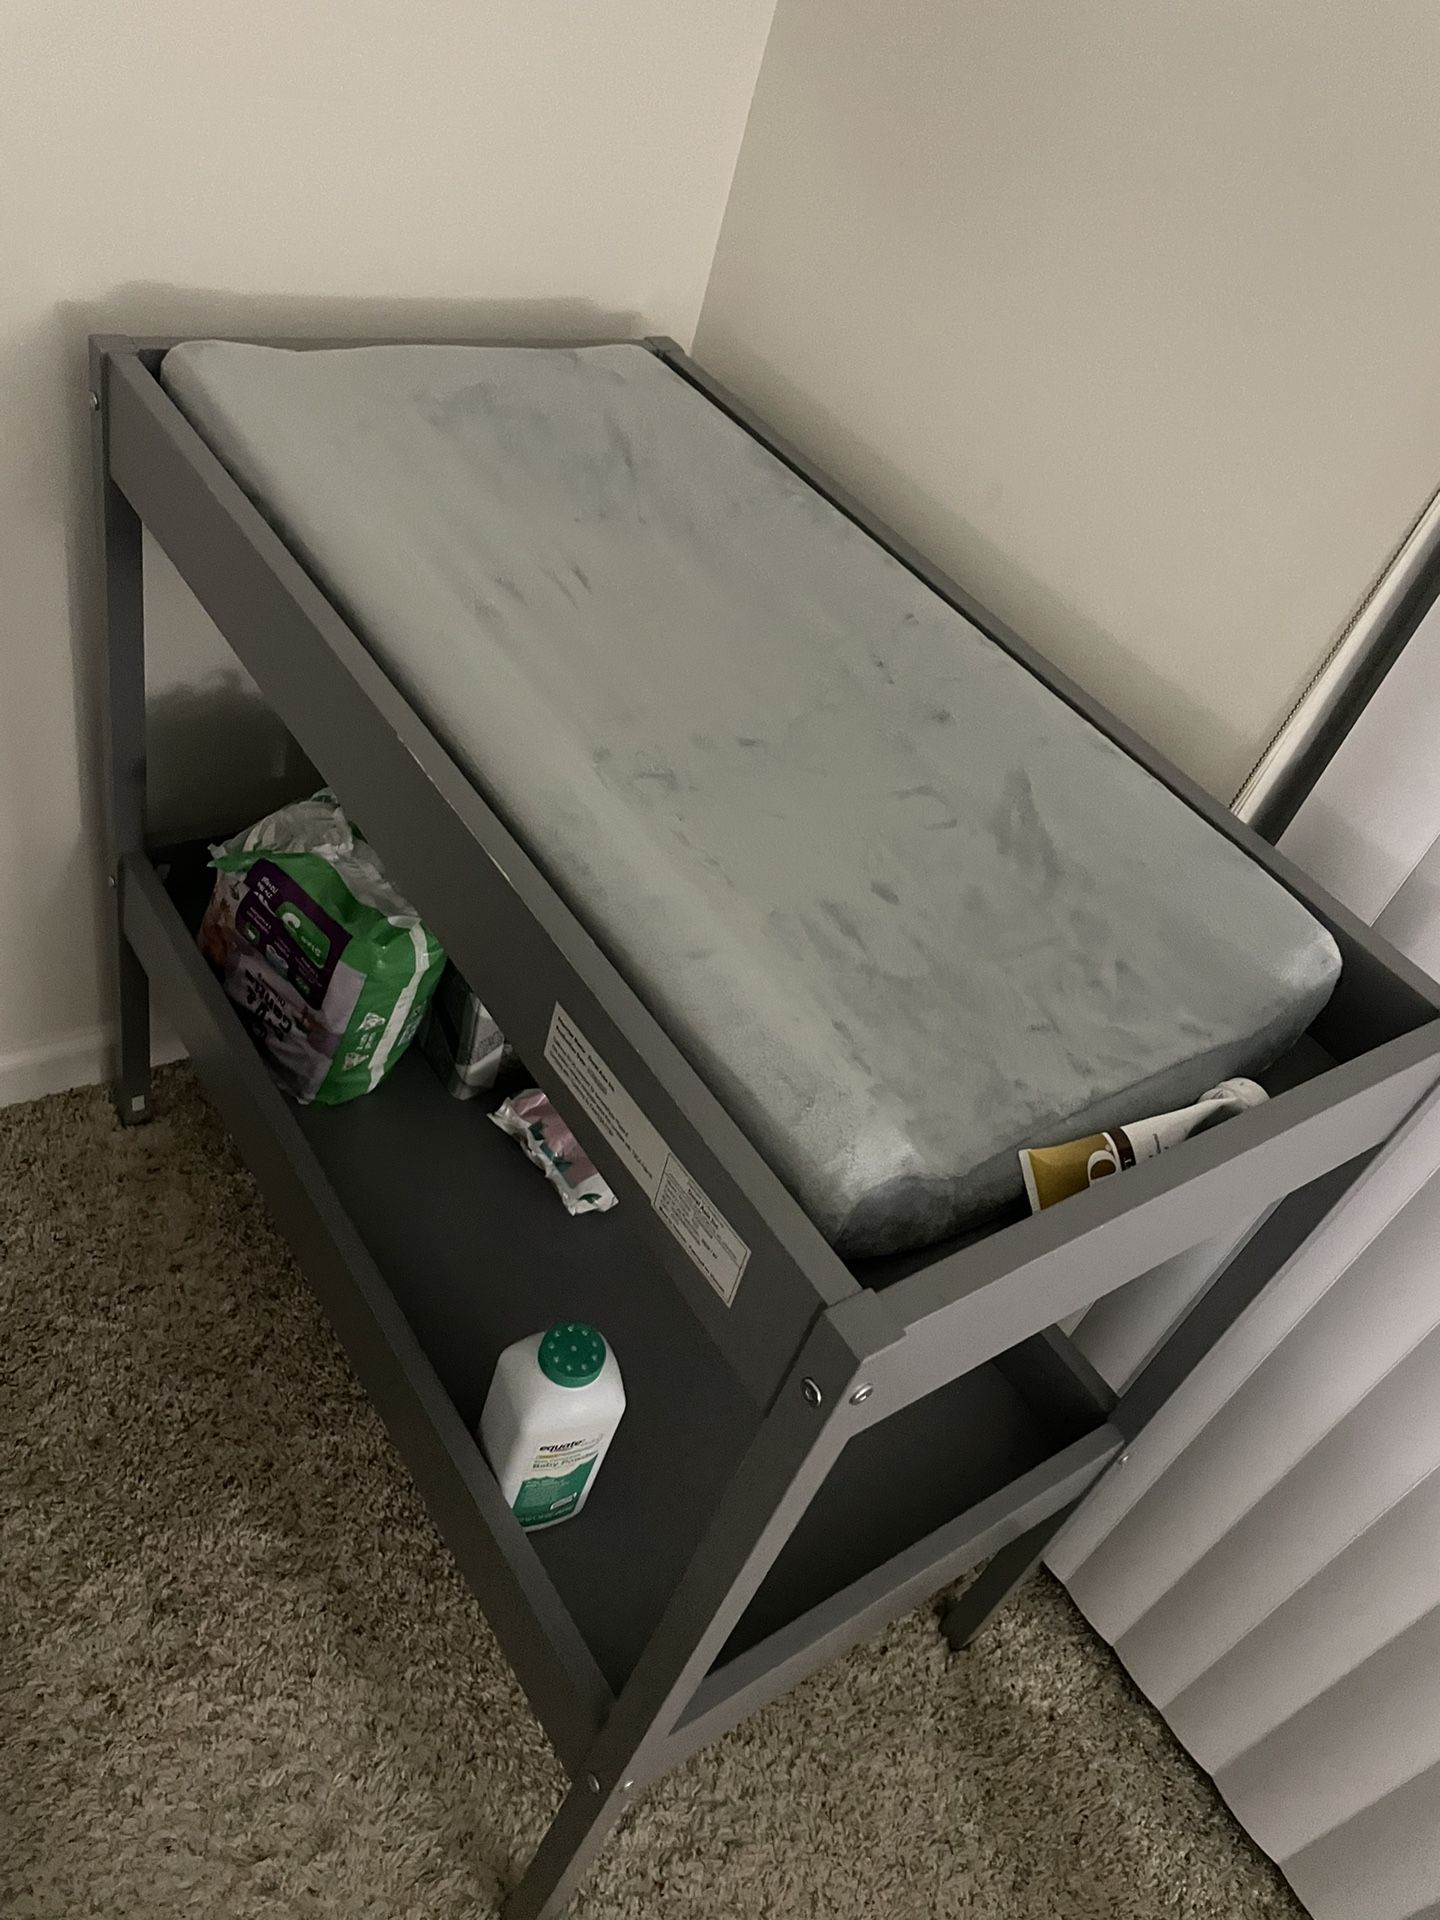 Baby Changing Table With Pad